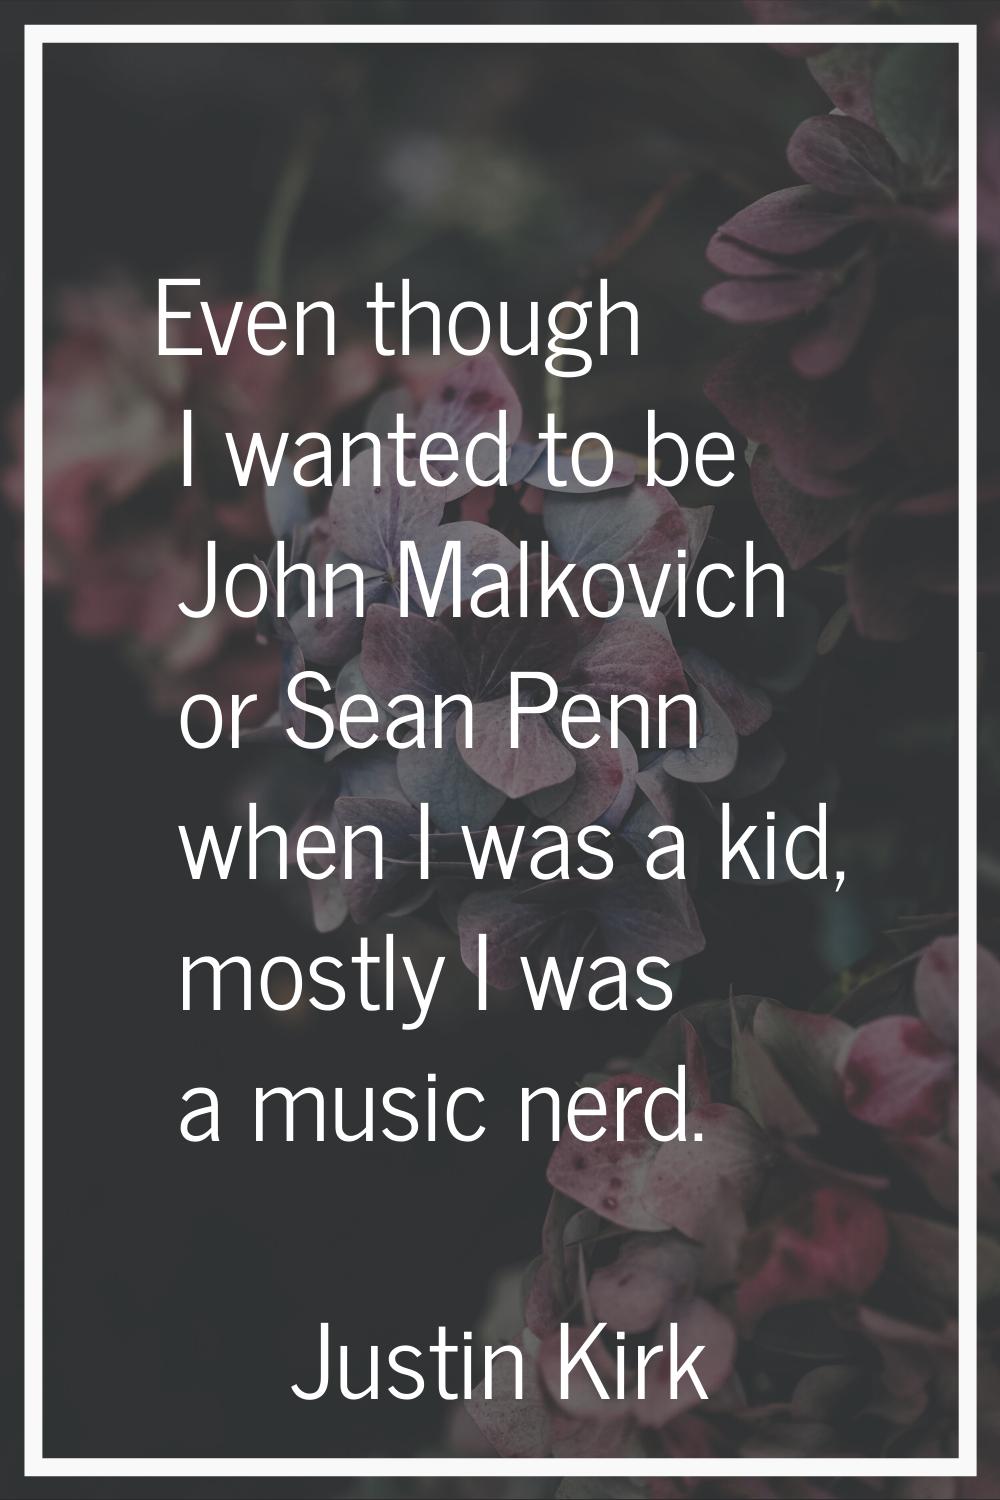 Even though I wanted to be John Malkovich or Sean Penn when I was a kid, mostly I was a music nerd.